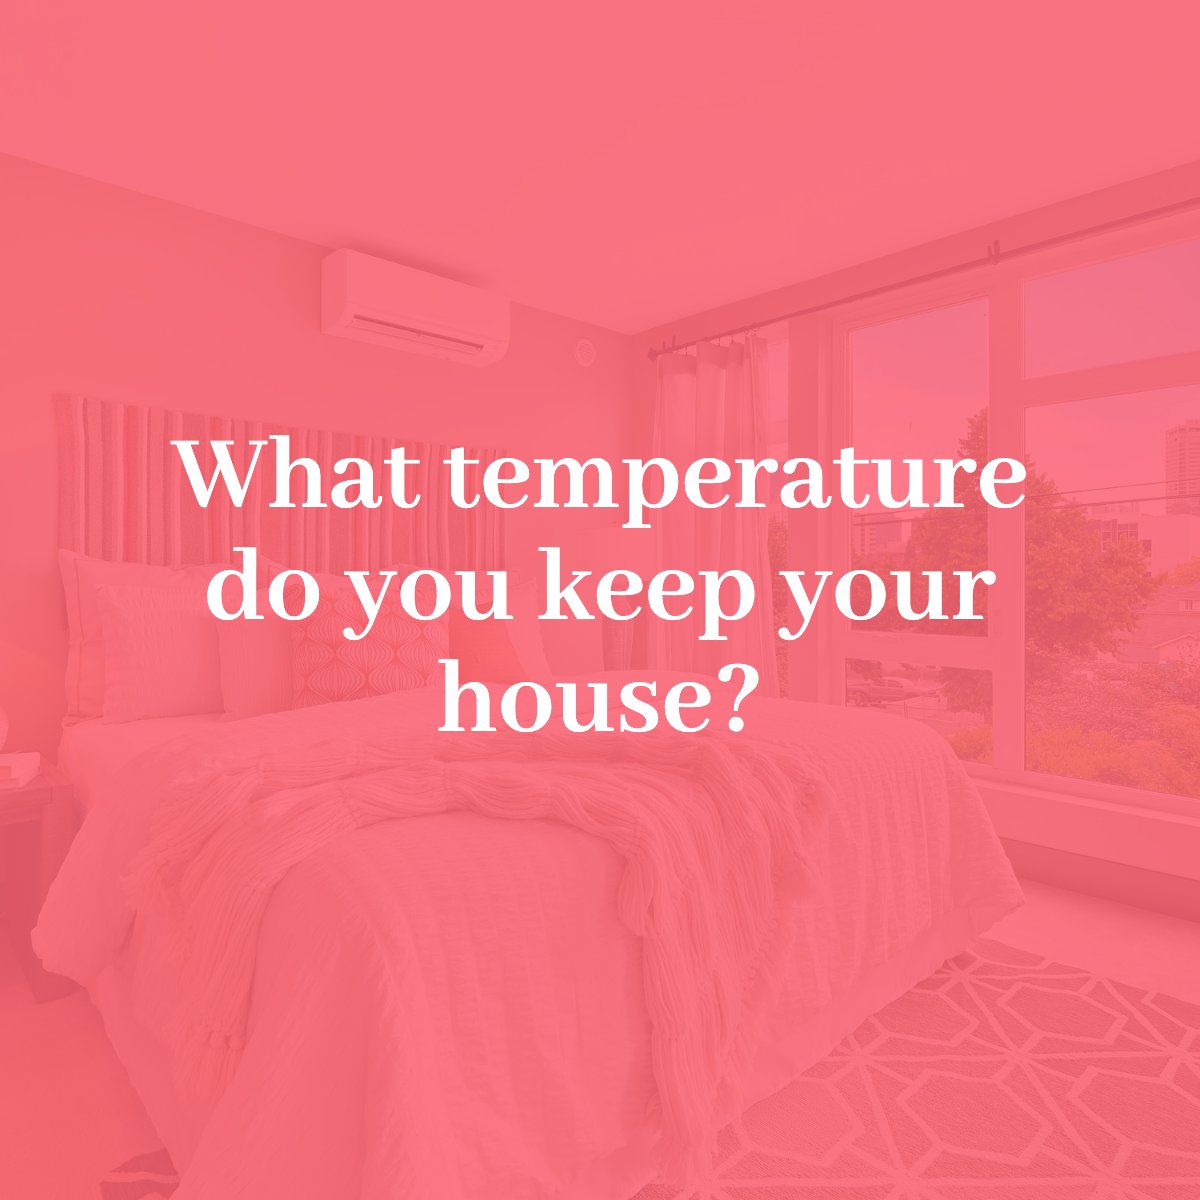 Tell us in the comment what temperature do you keep in your house? 🌡️

#housewarming #temperature #housegoals
 #RealestateAppleton #Appletonwisconsin #AppletonWisconsinRealEstate #CharlesRobbinsRealtor